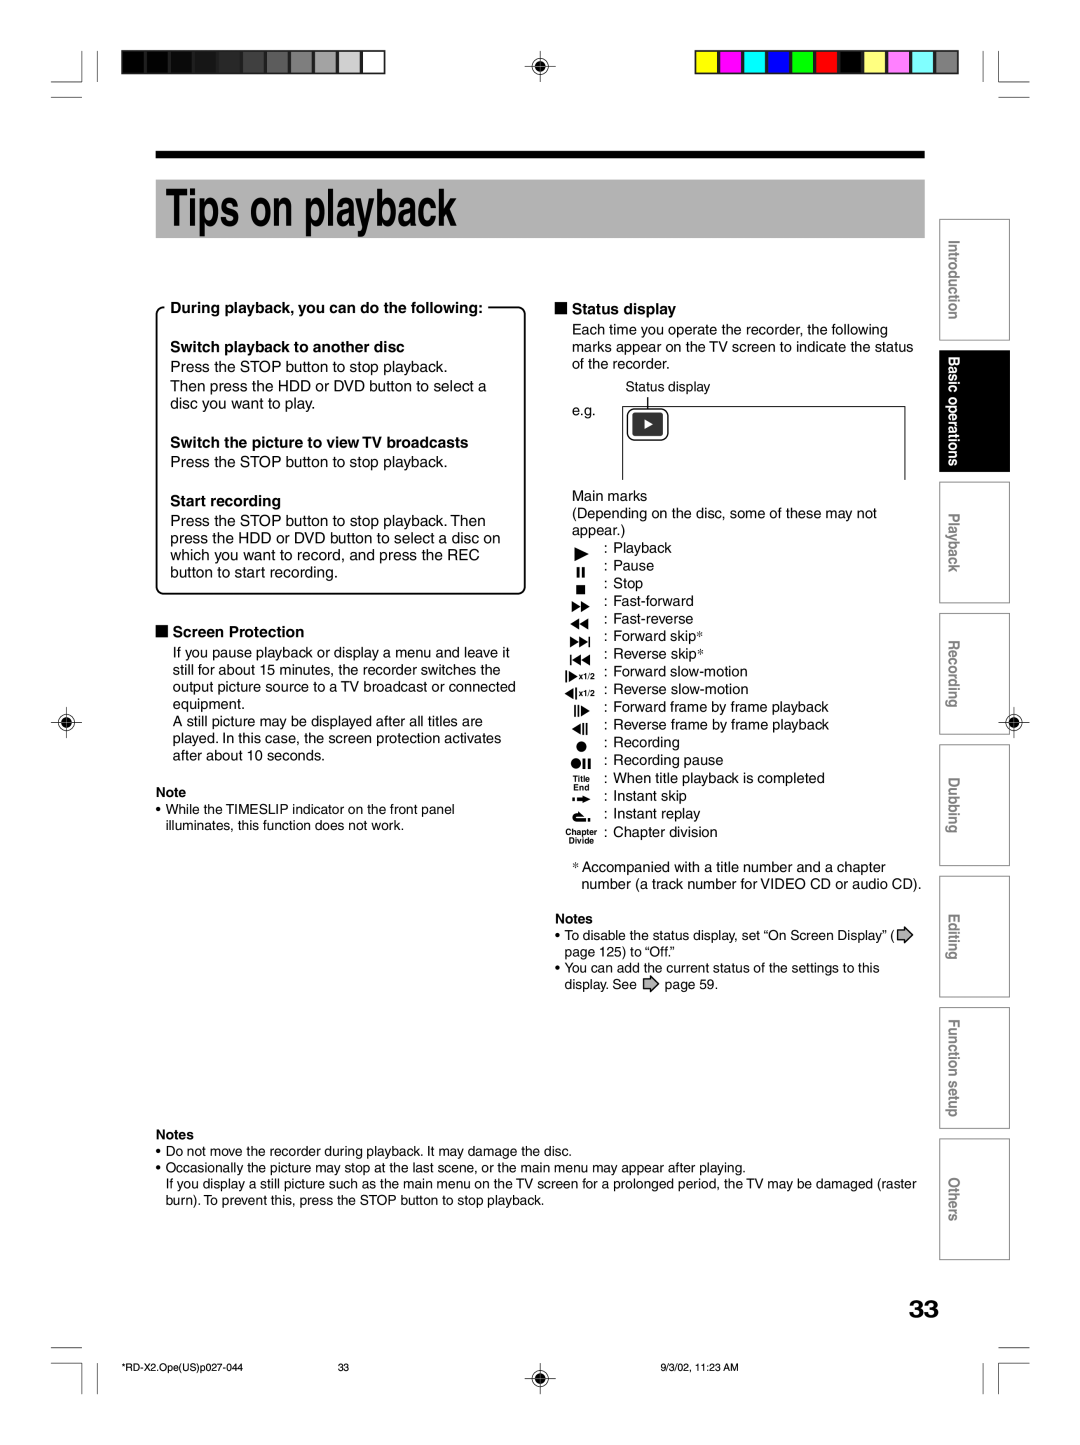 Toshiba RD-X2U owner manual Tips on playback, During playback, you can do the following, Switch playback to another disc 